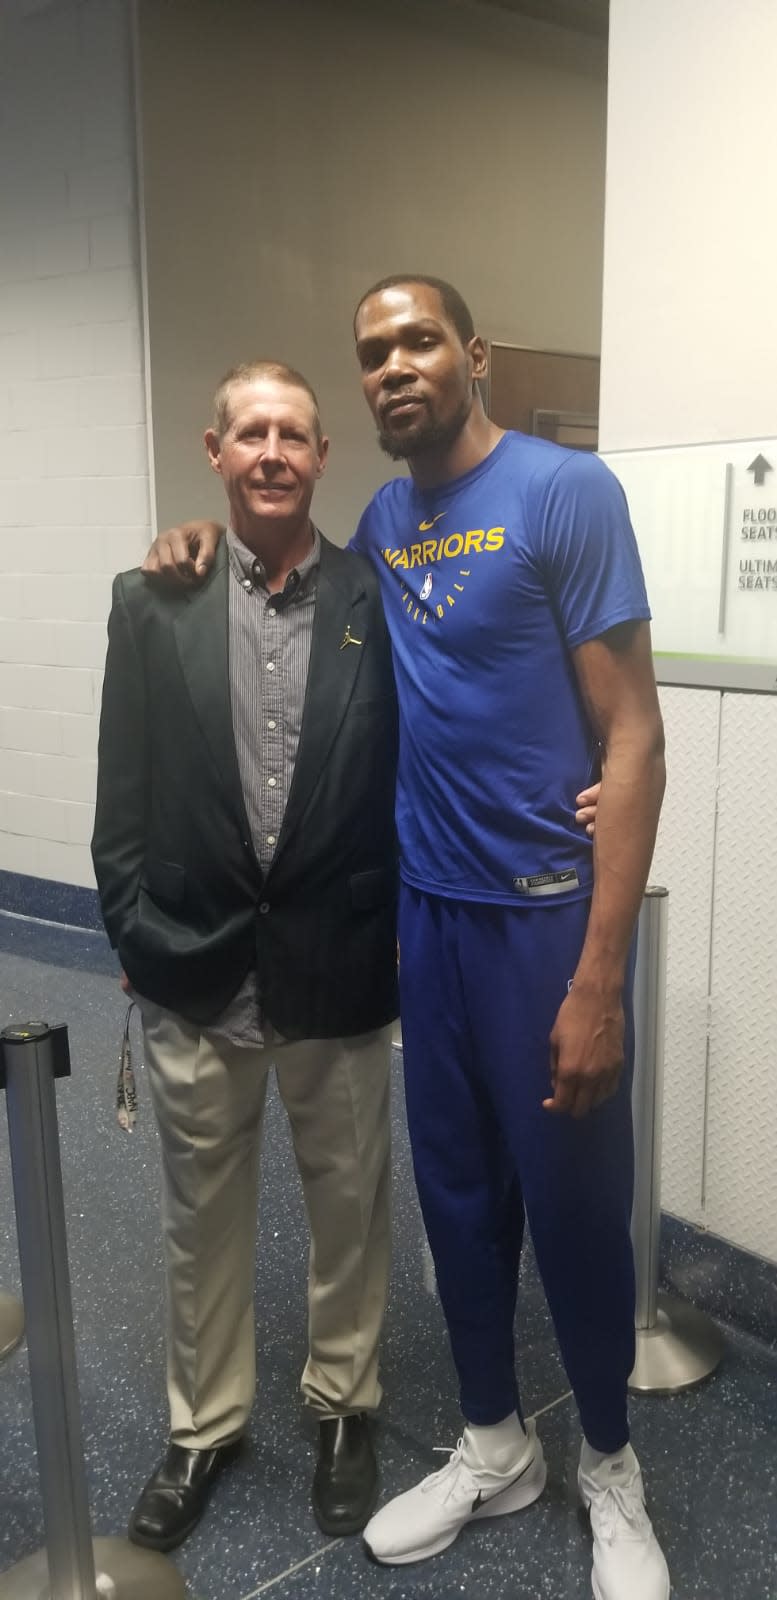 Rick Walrond, a former assistant basketball coach at Stetson and Bethune-Cookman, stands with NBA superstar Kevin Durant. Walrond sometimes brings former professional players — like Audie Norris and Clemon Johnson — with him to camps.